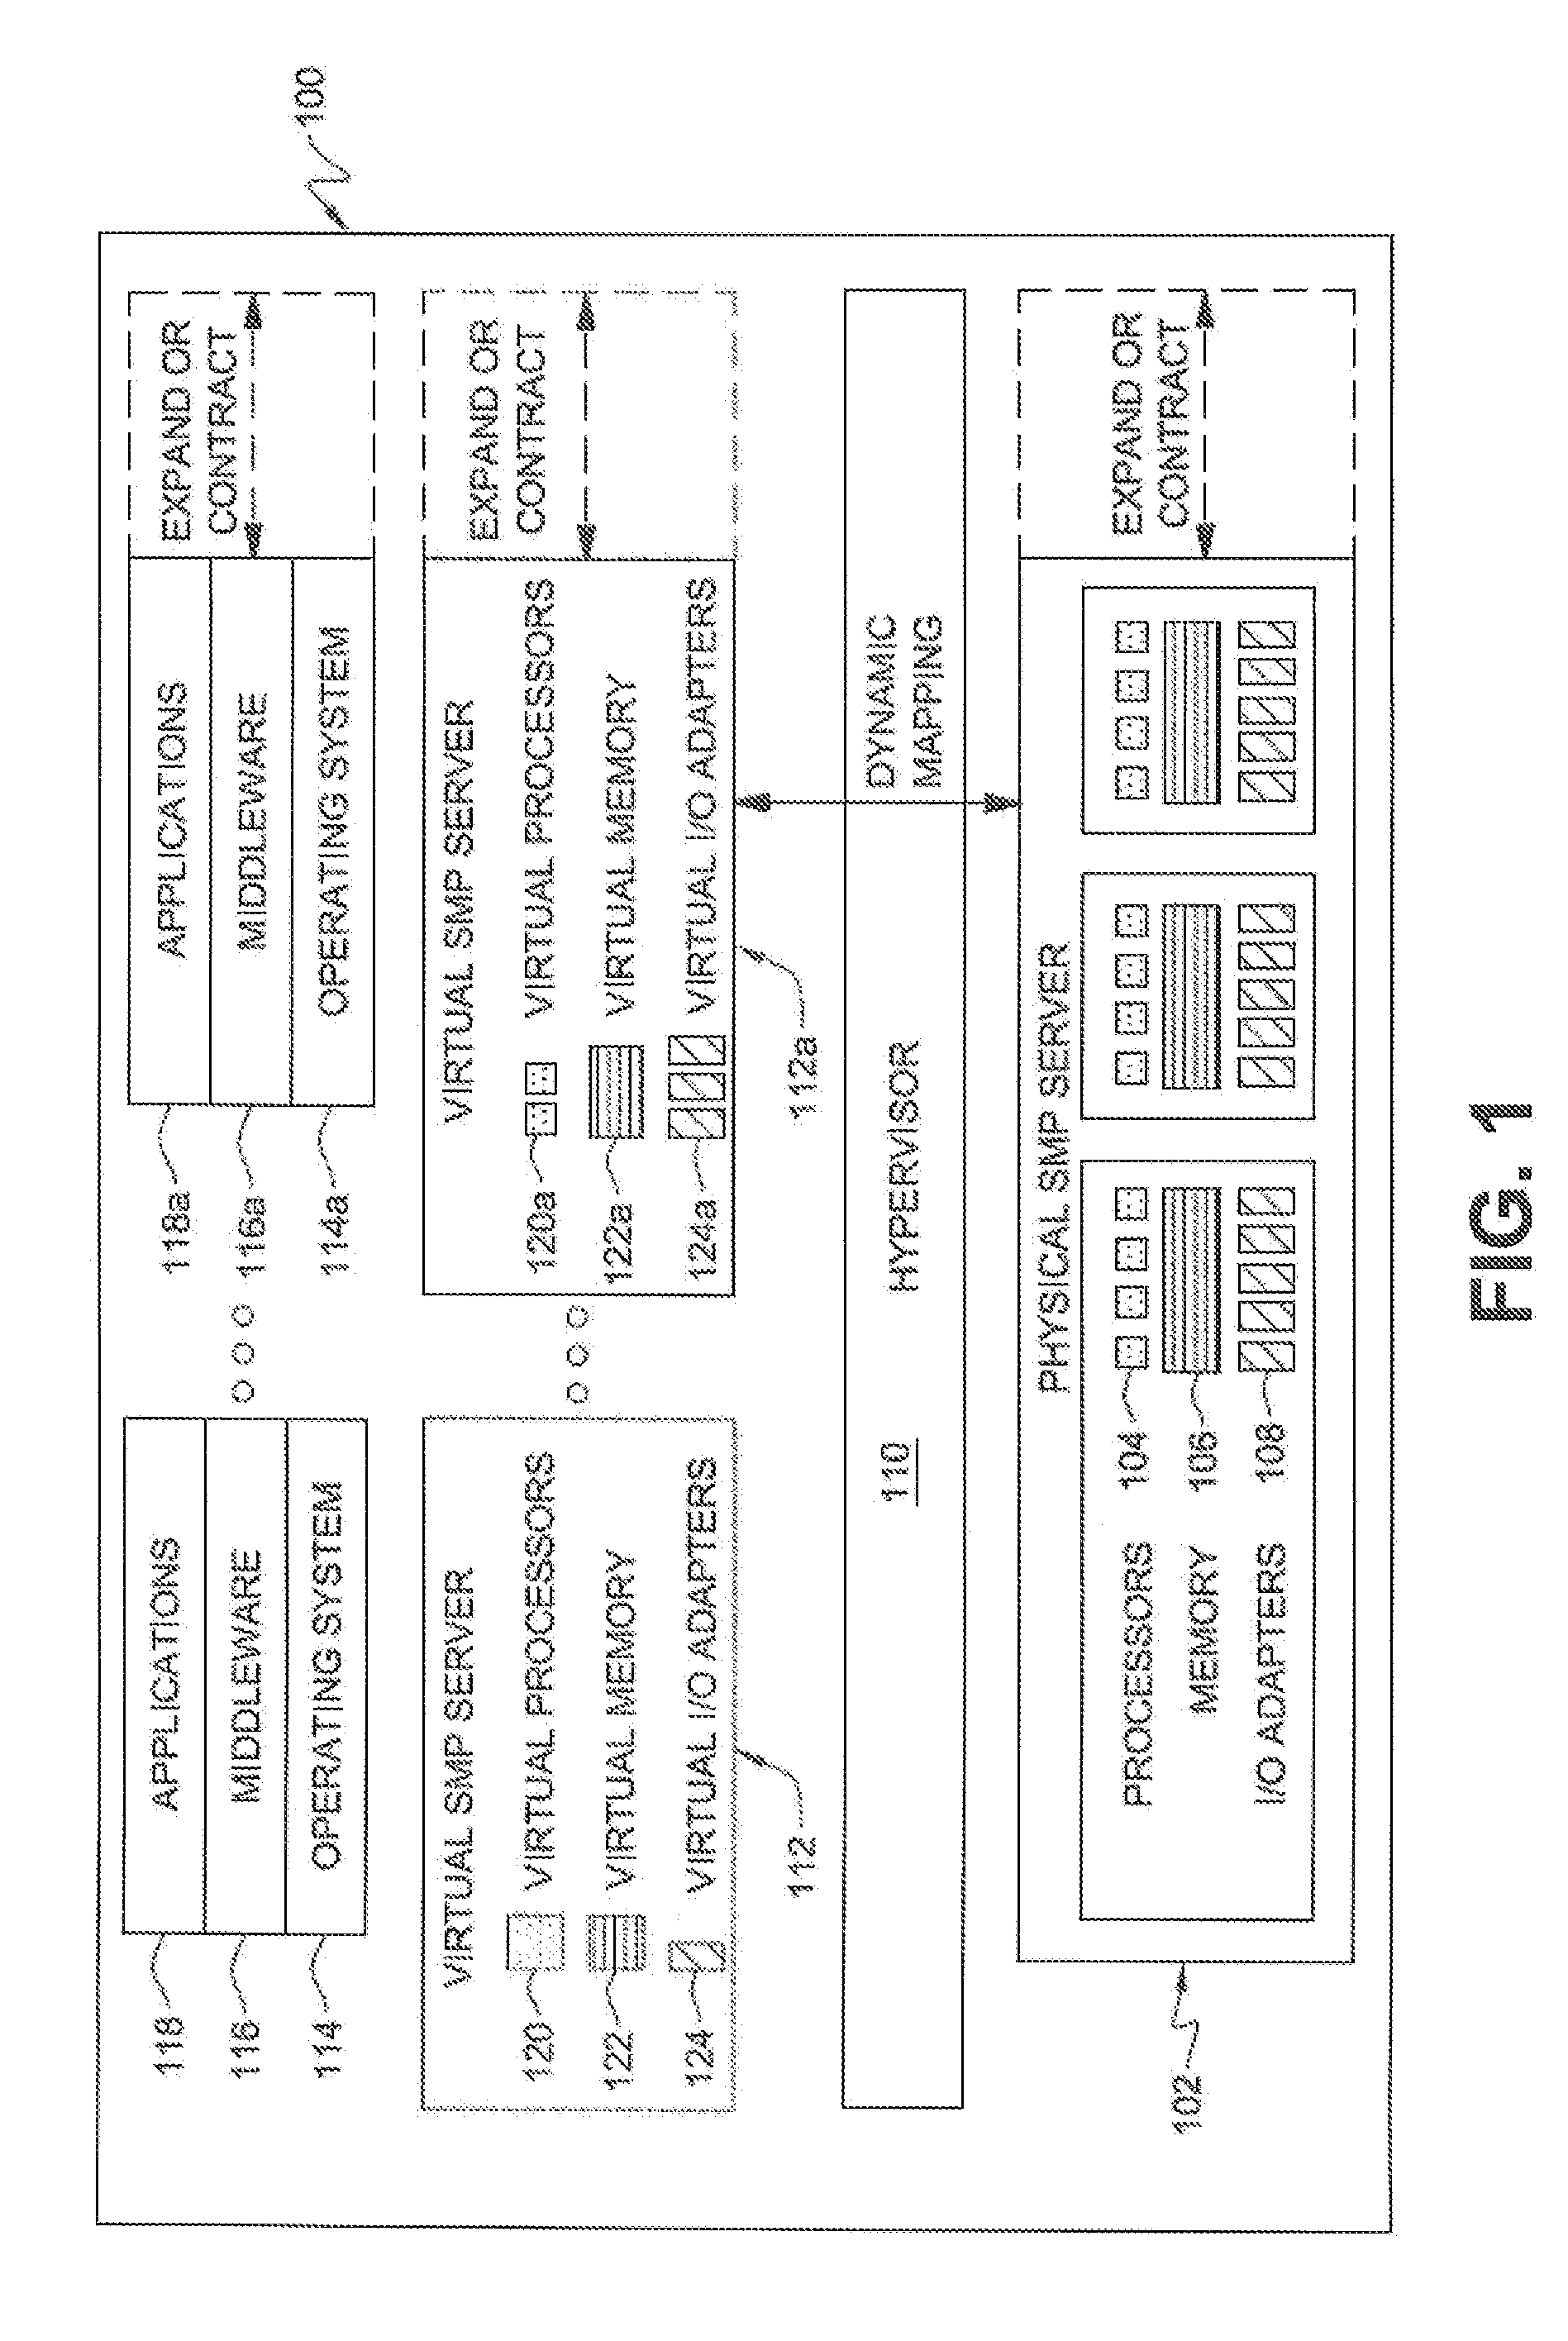 Vendor-independent resource configuration interface for self-virtualizing input/output device